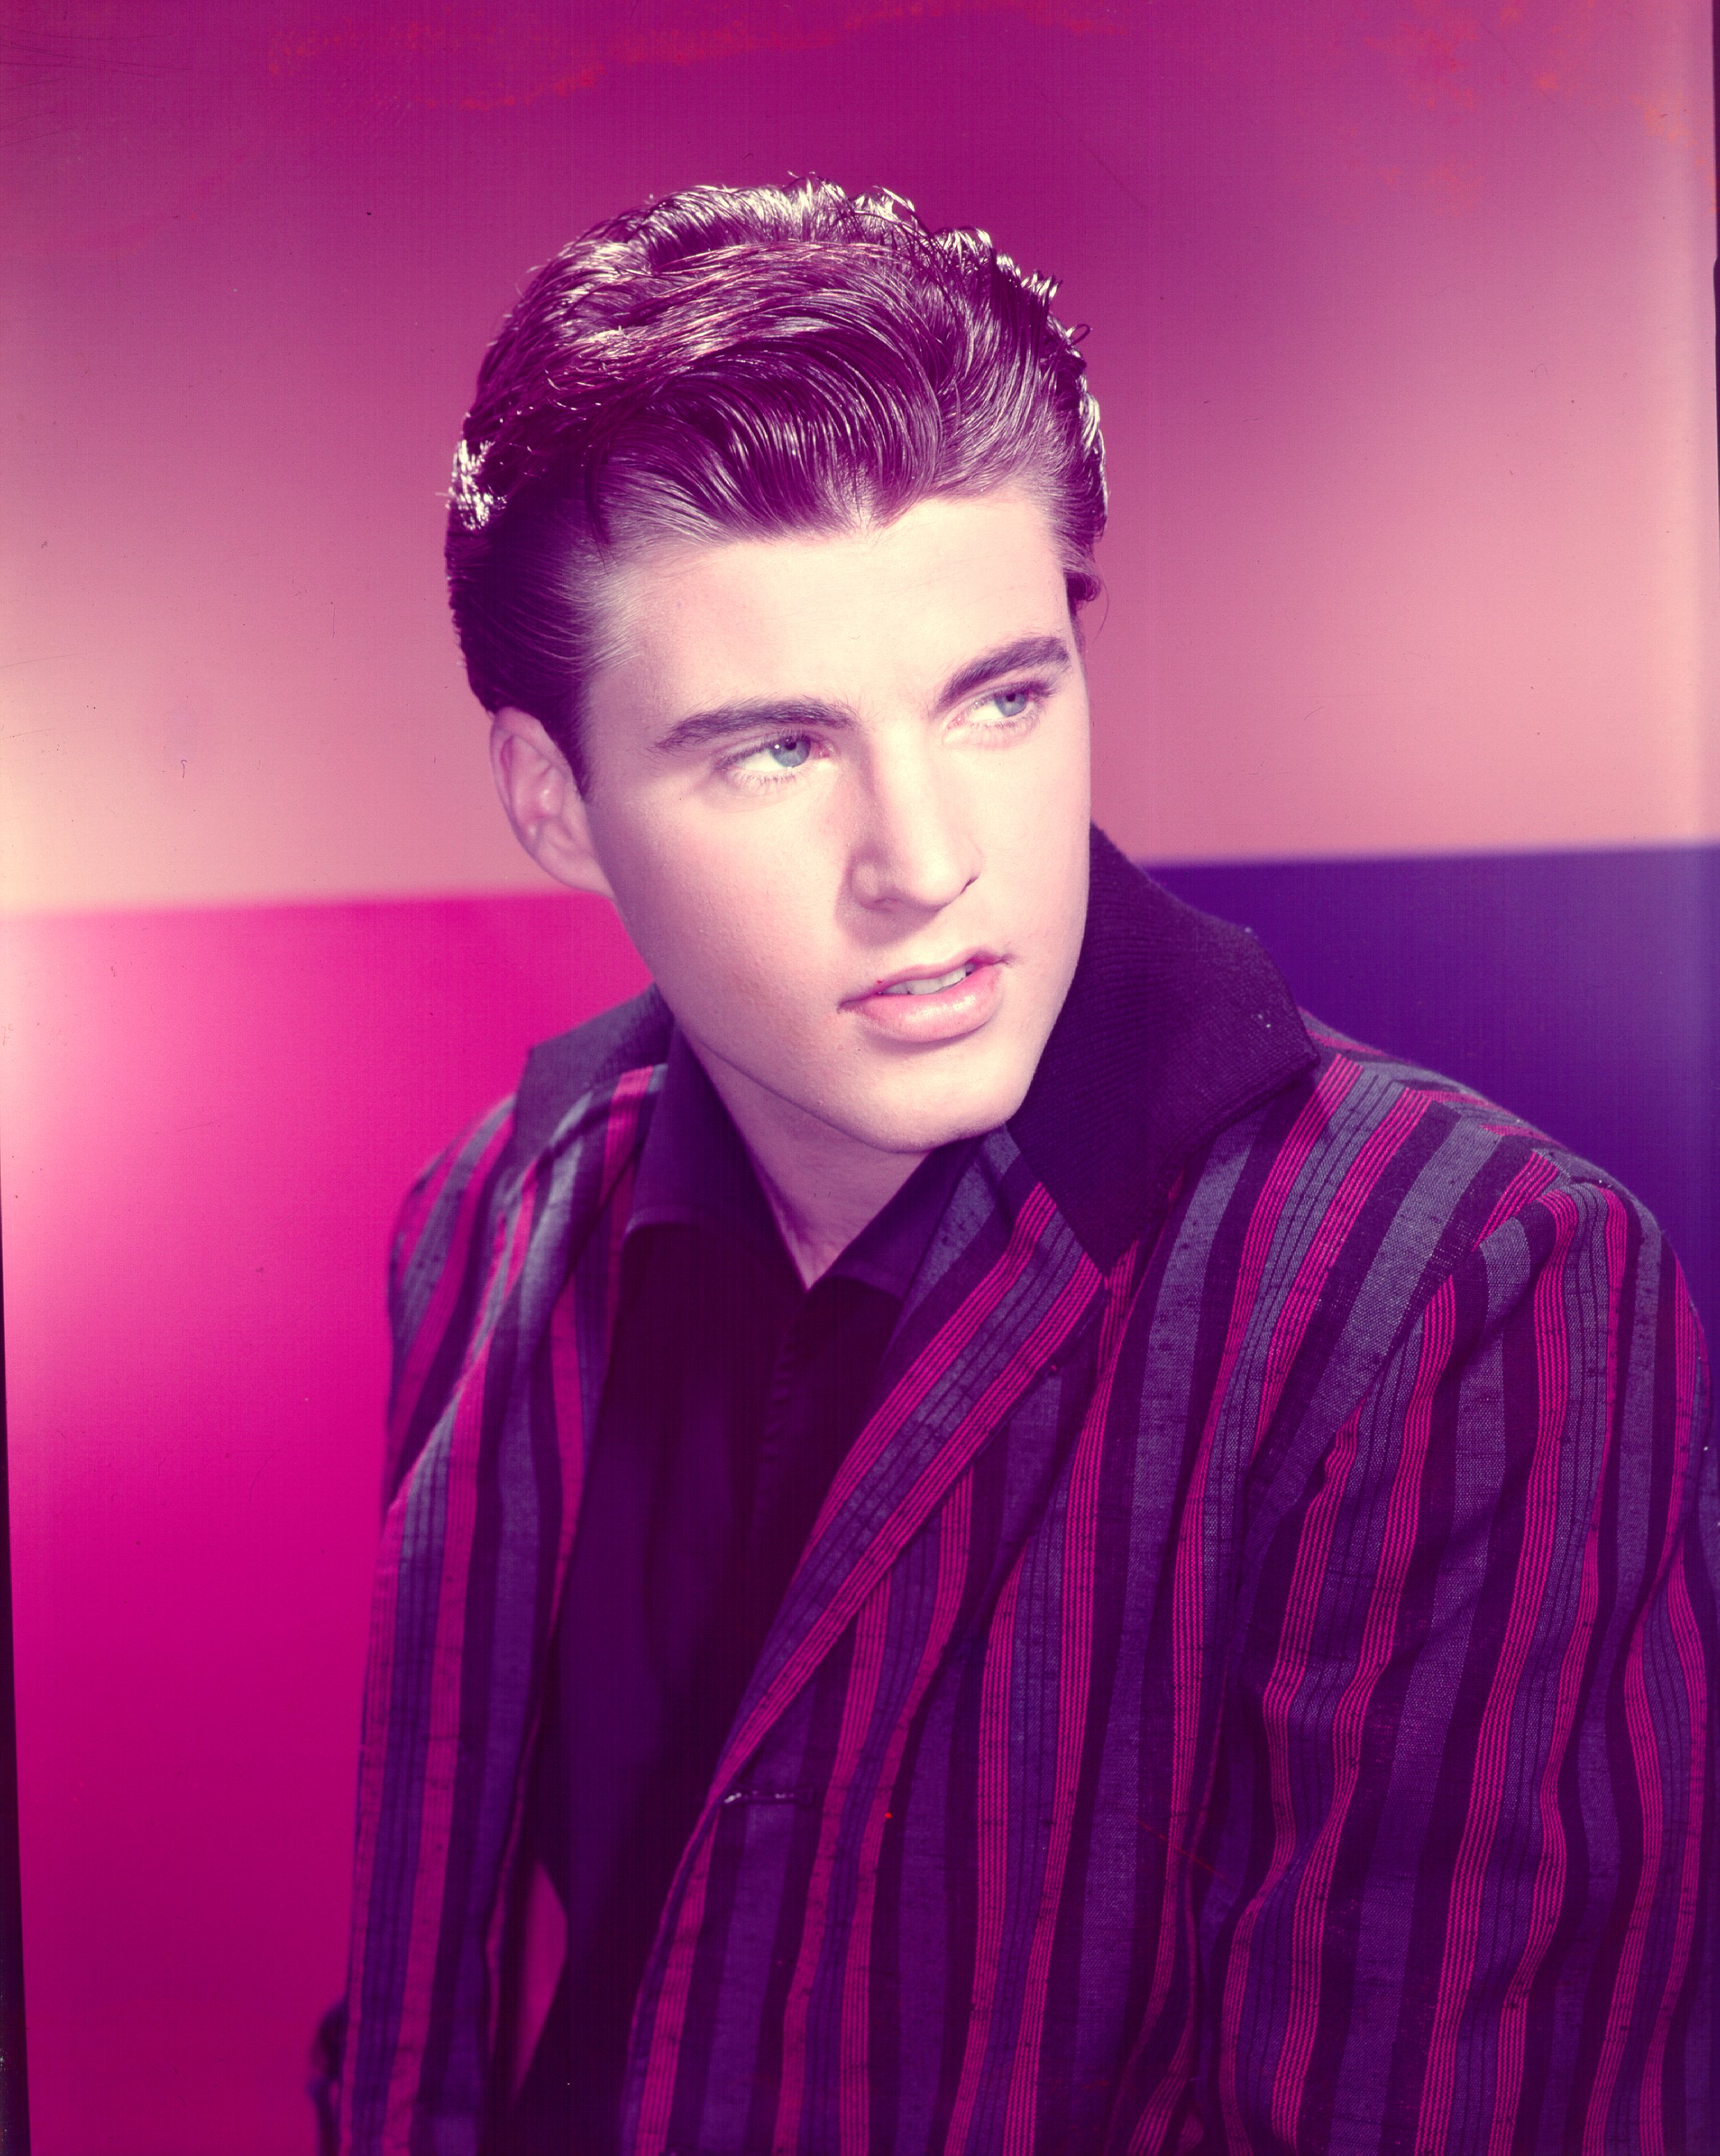 Rick Nelson poses for a portrait in circa 1957. | Photo: Getty Images